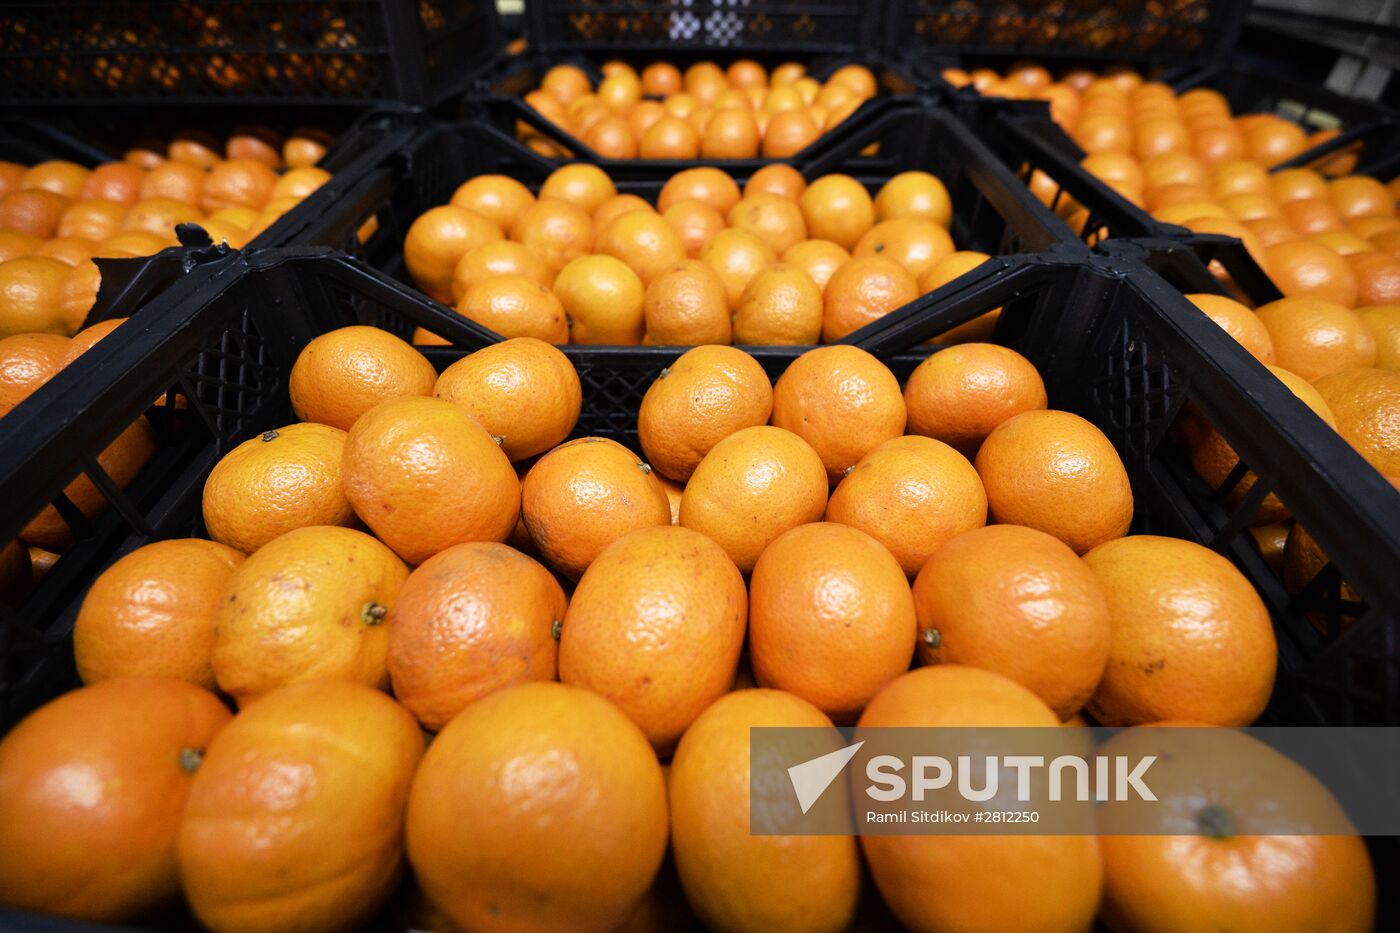 Syrian vegetable and fruit sold in Moscow